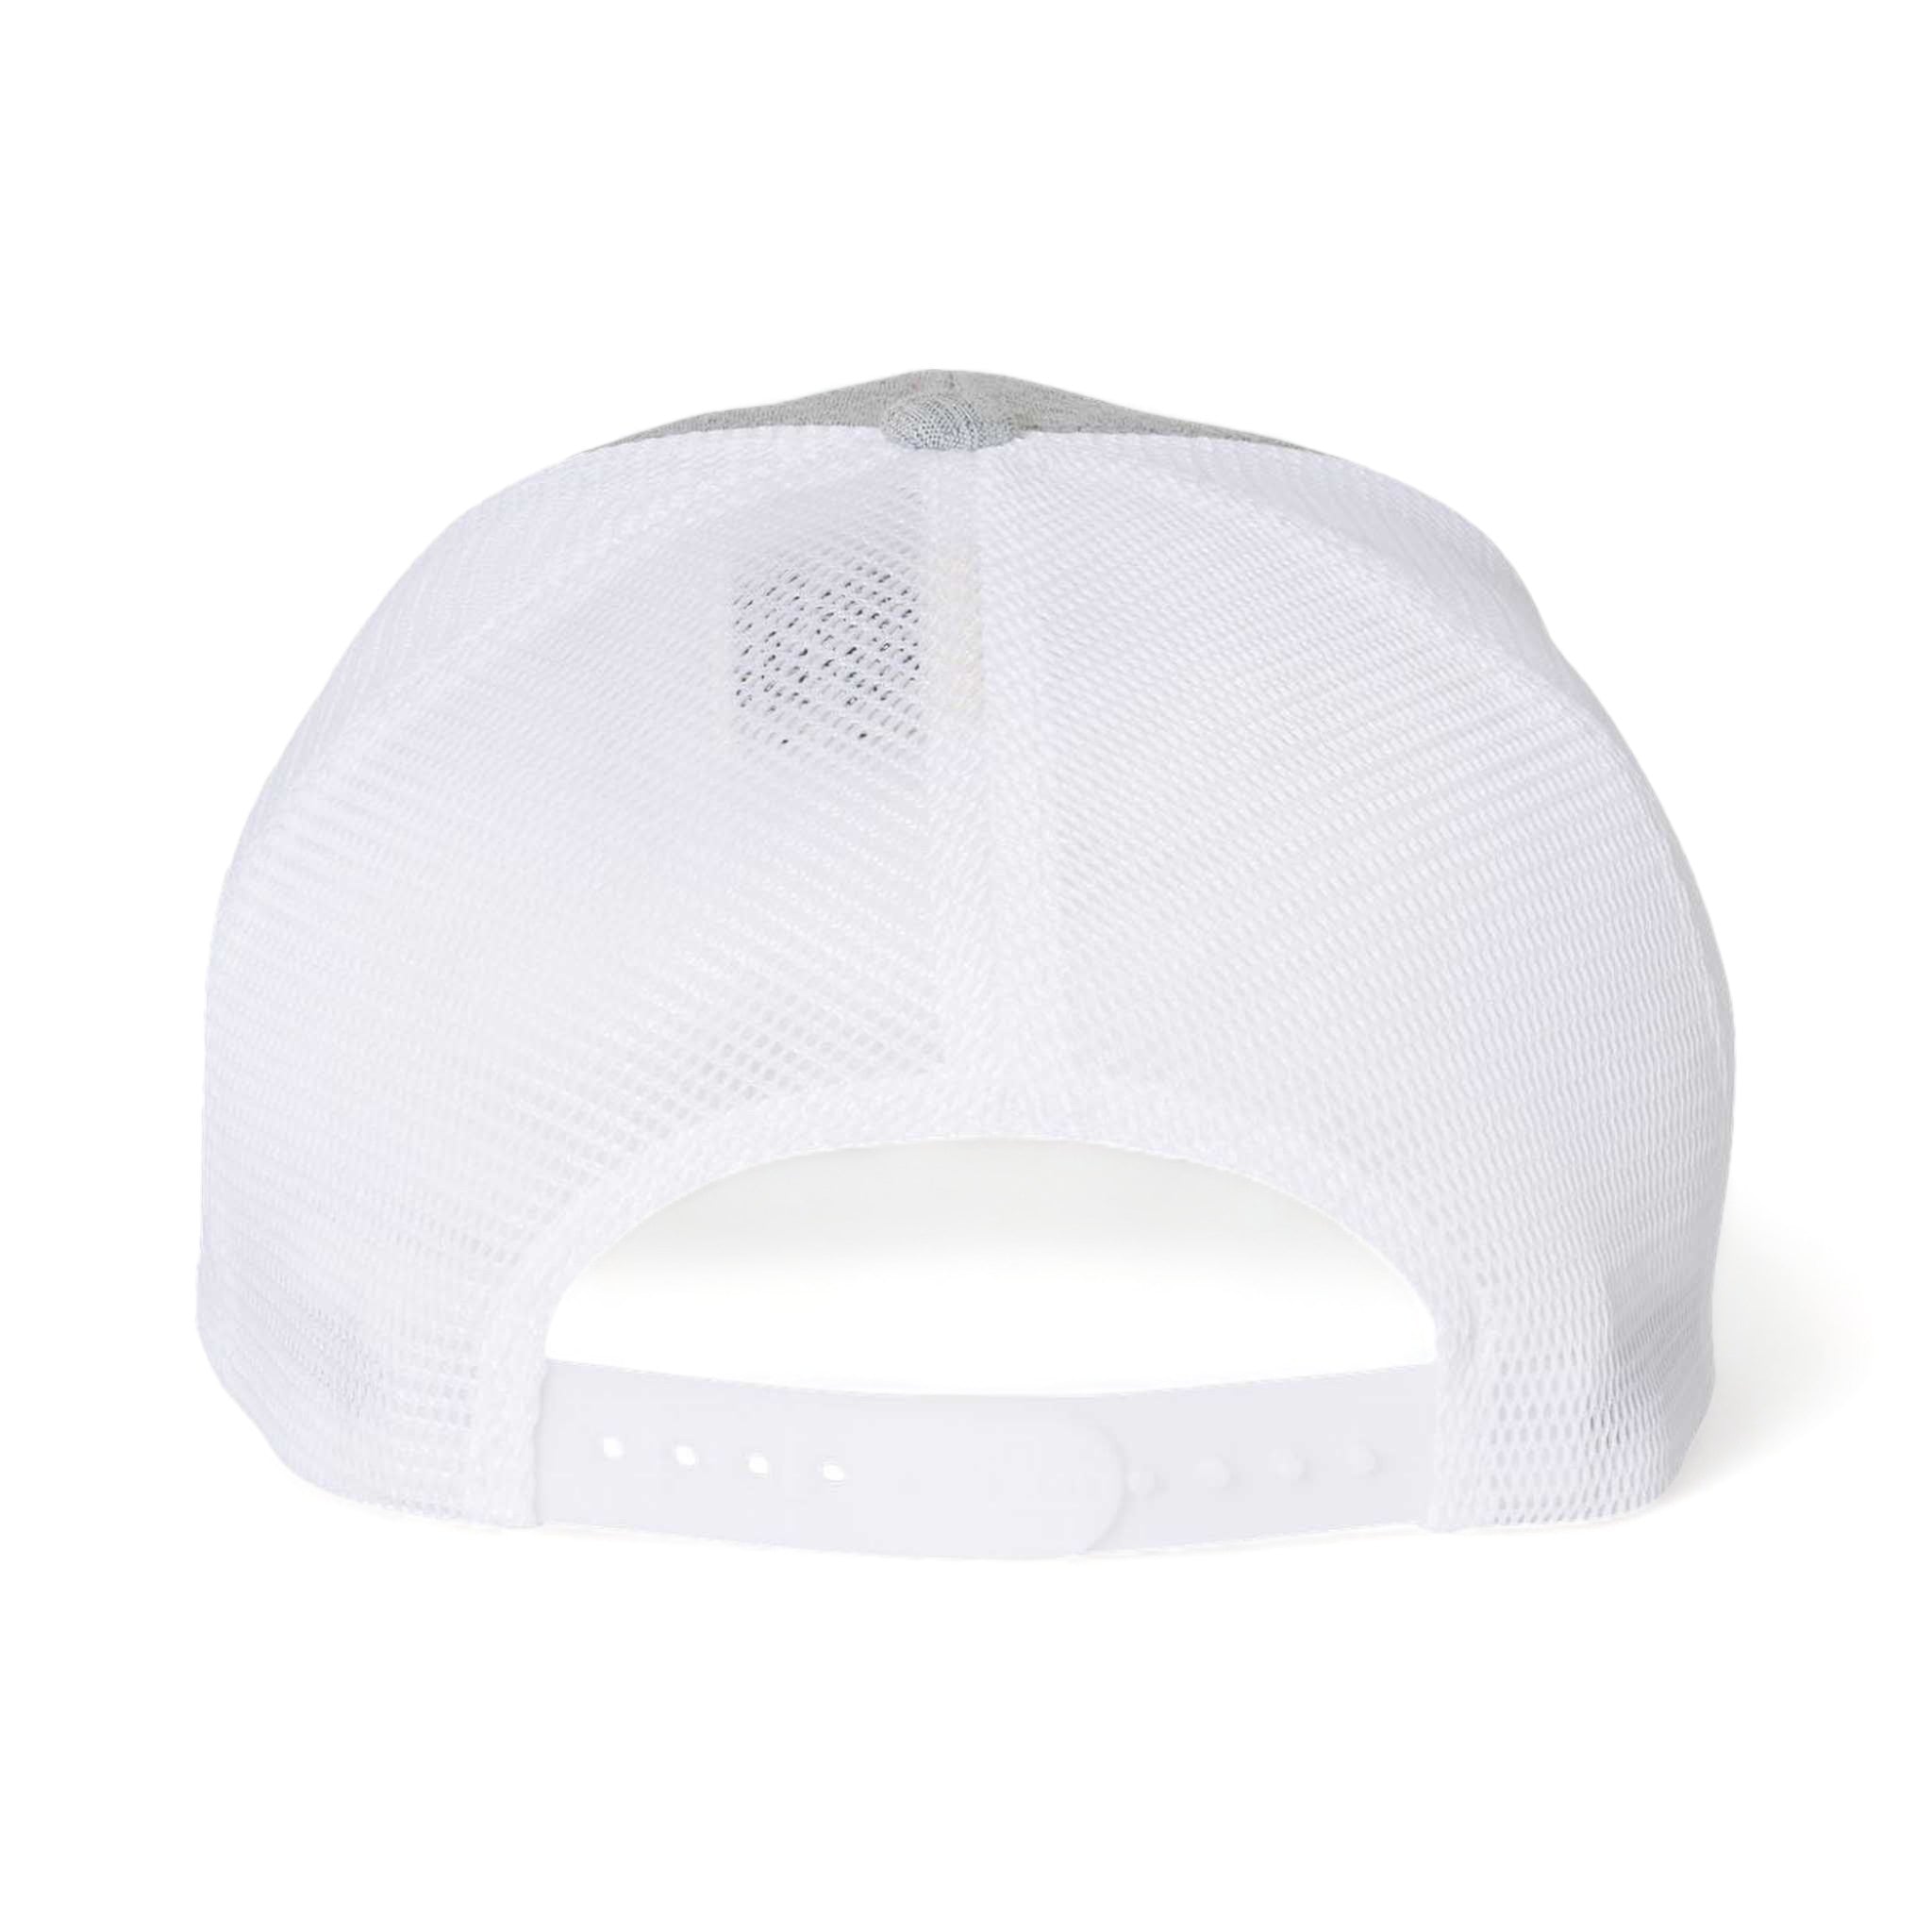 Back view of Flexfit 110M custom hat in melange silver and white